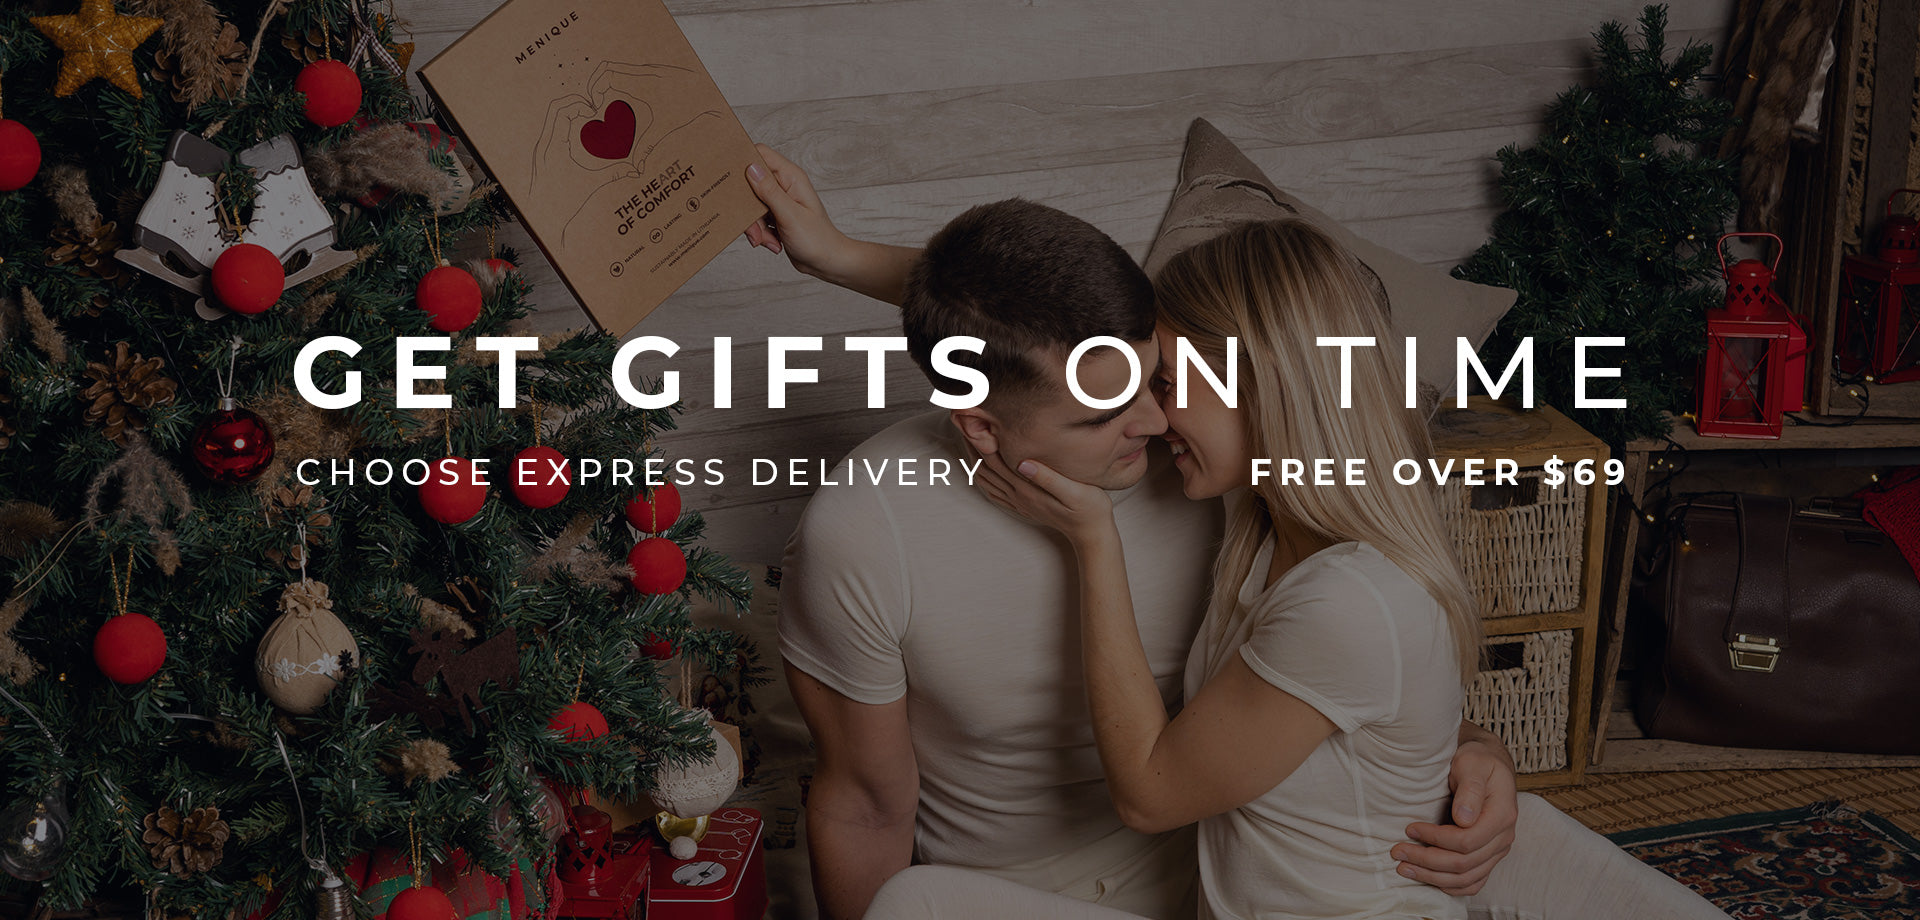 Get gifts on time with express delivery which is free over $69